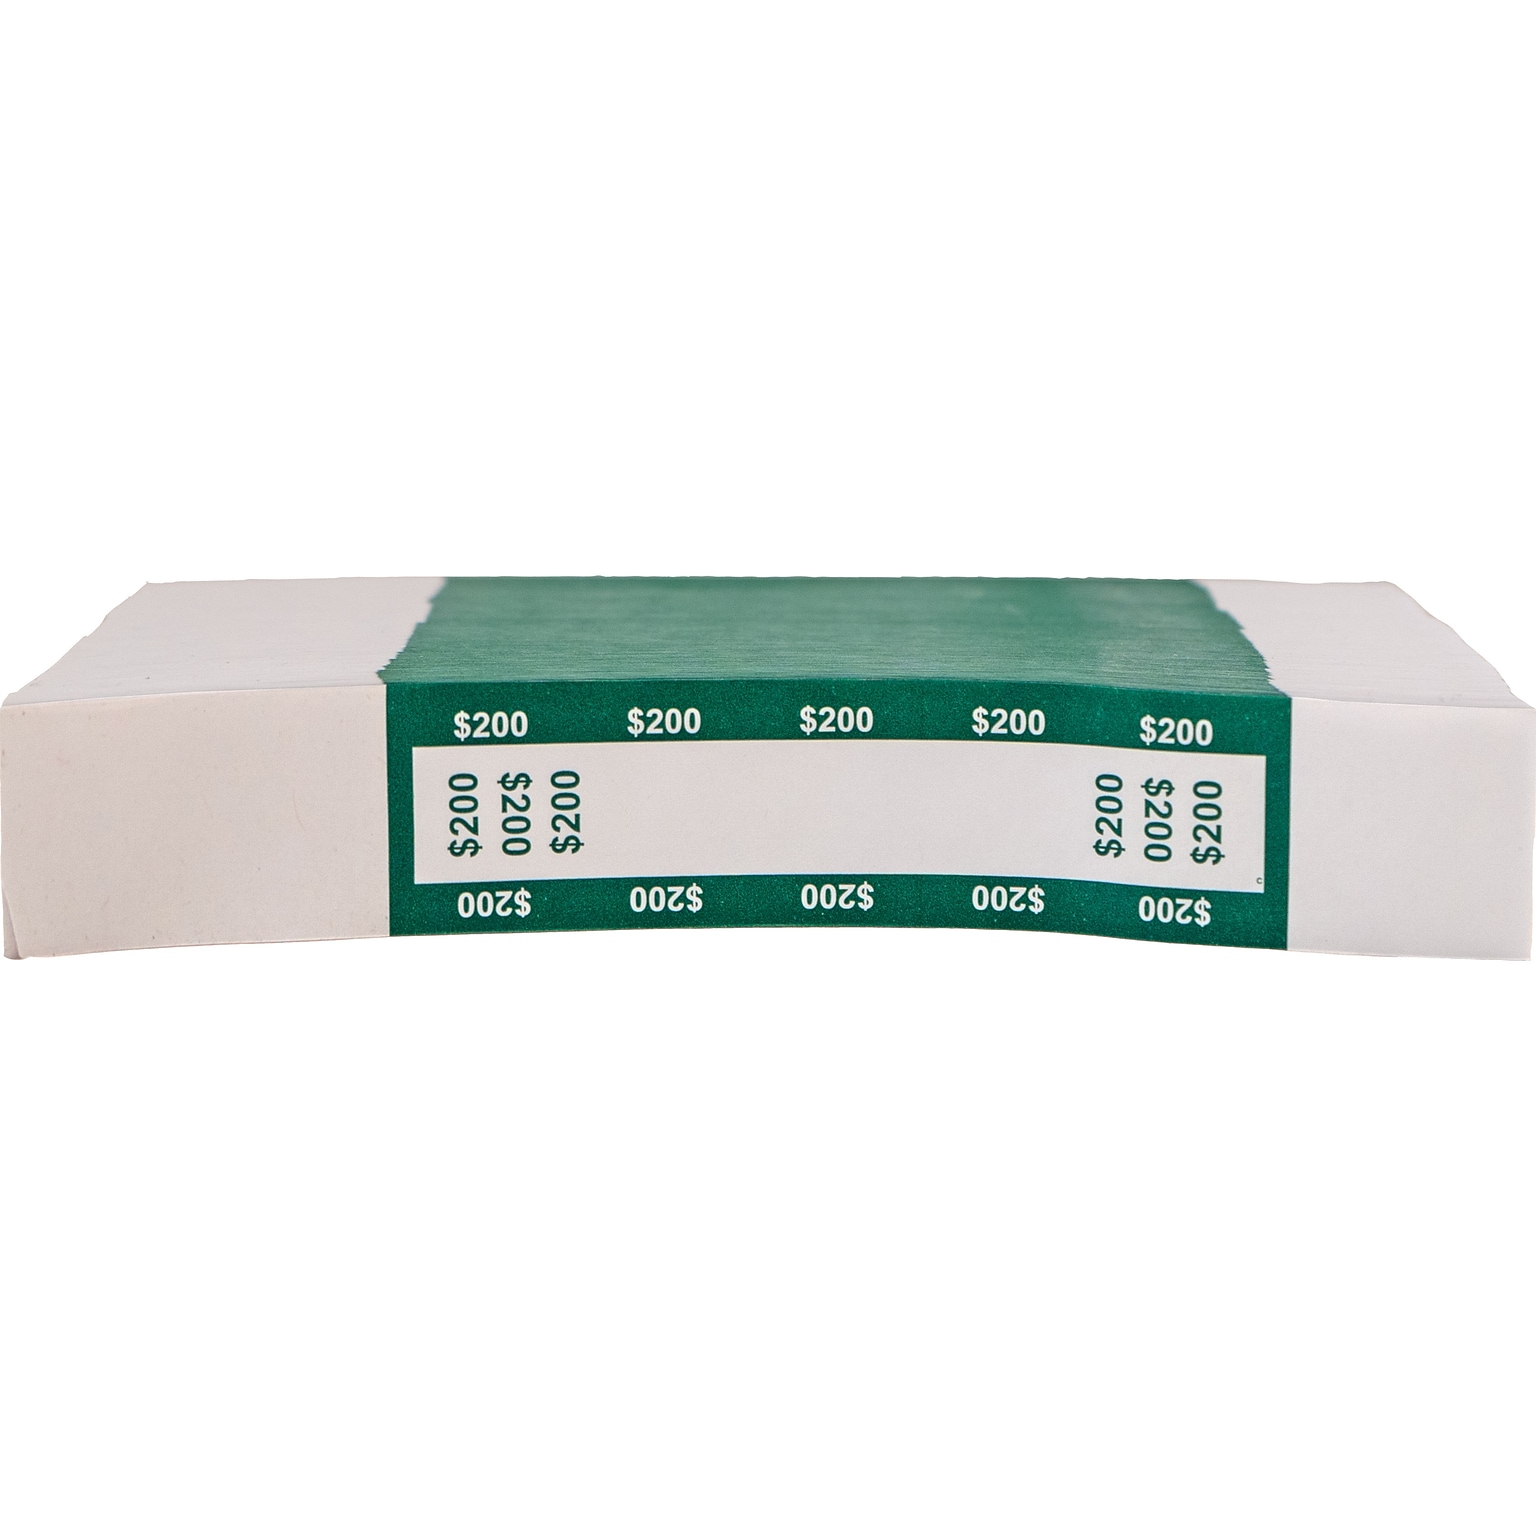 CONTROLTEK $200 Currency Strap, White/Green, 1000/Pack (560017)